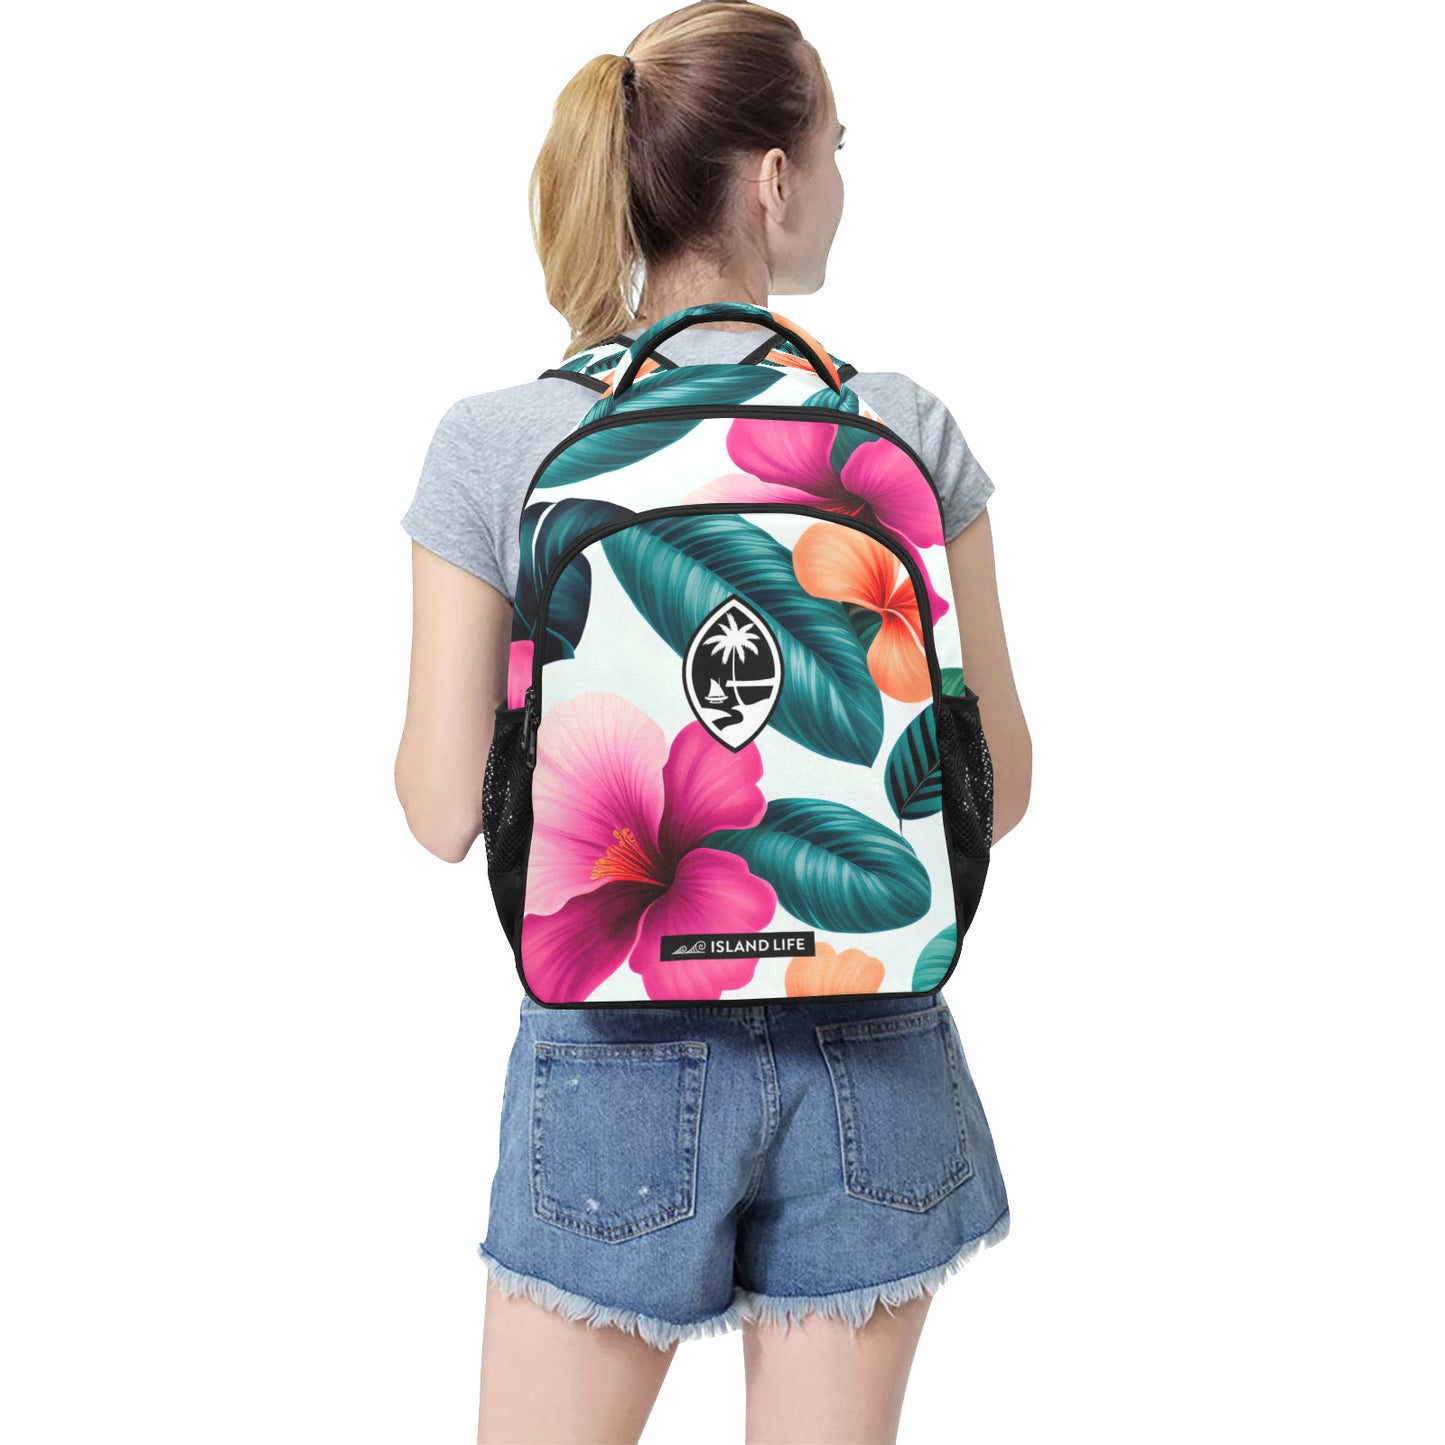 Guam Fuchsia Floral Multifunctional Backpack